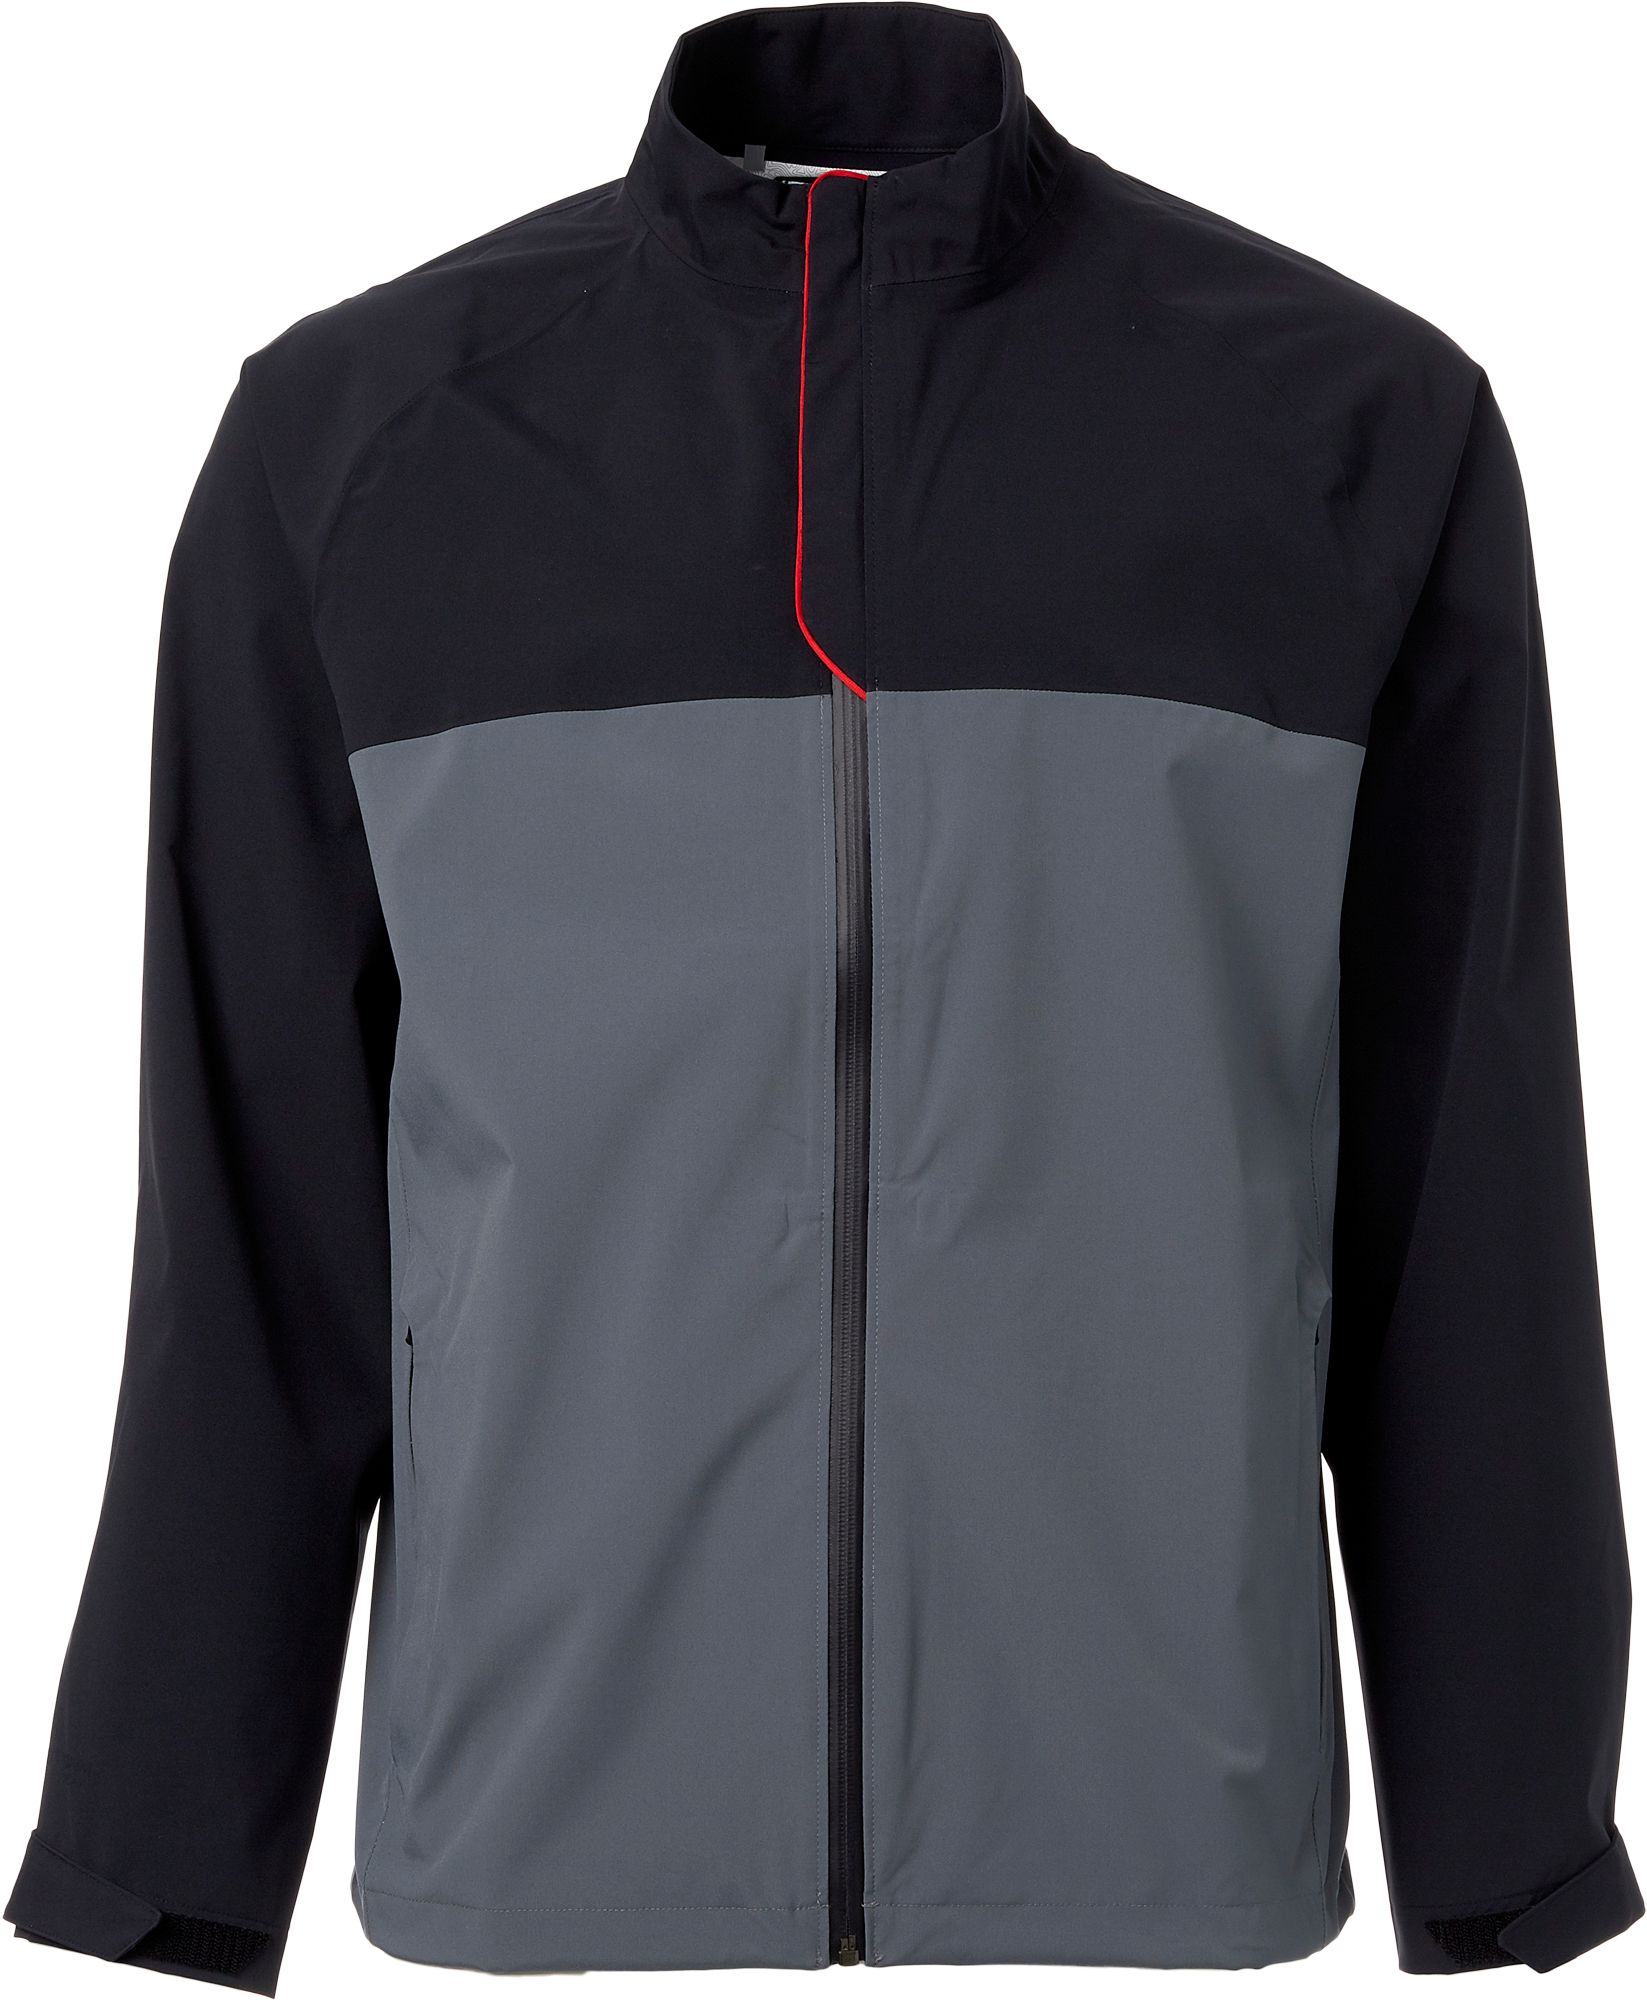 under armour storm 2 jacket review